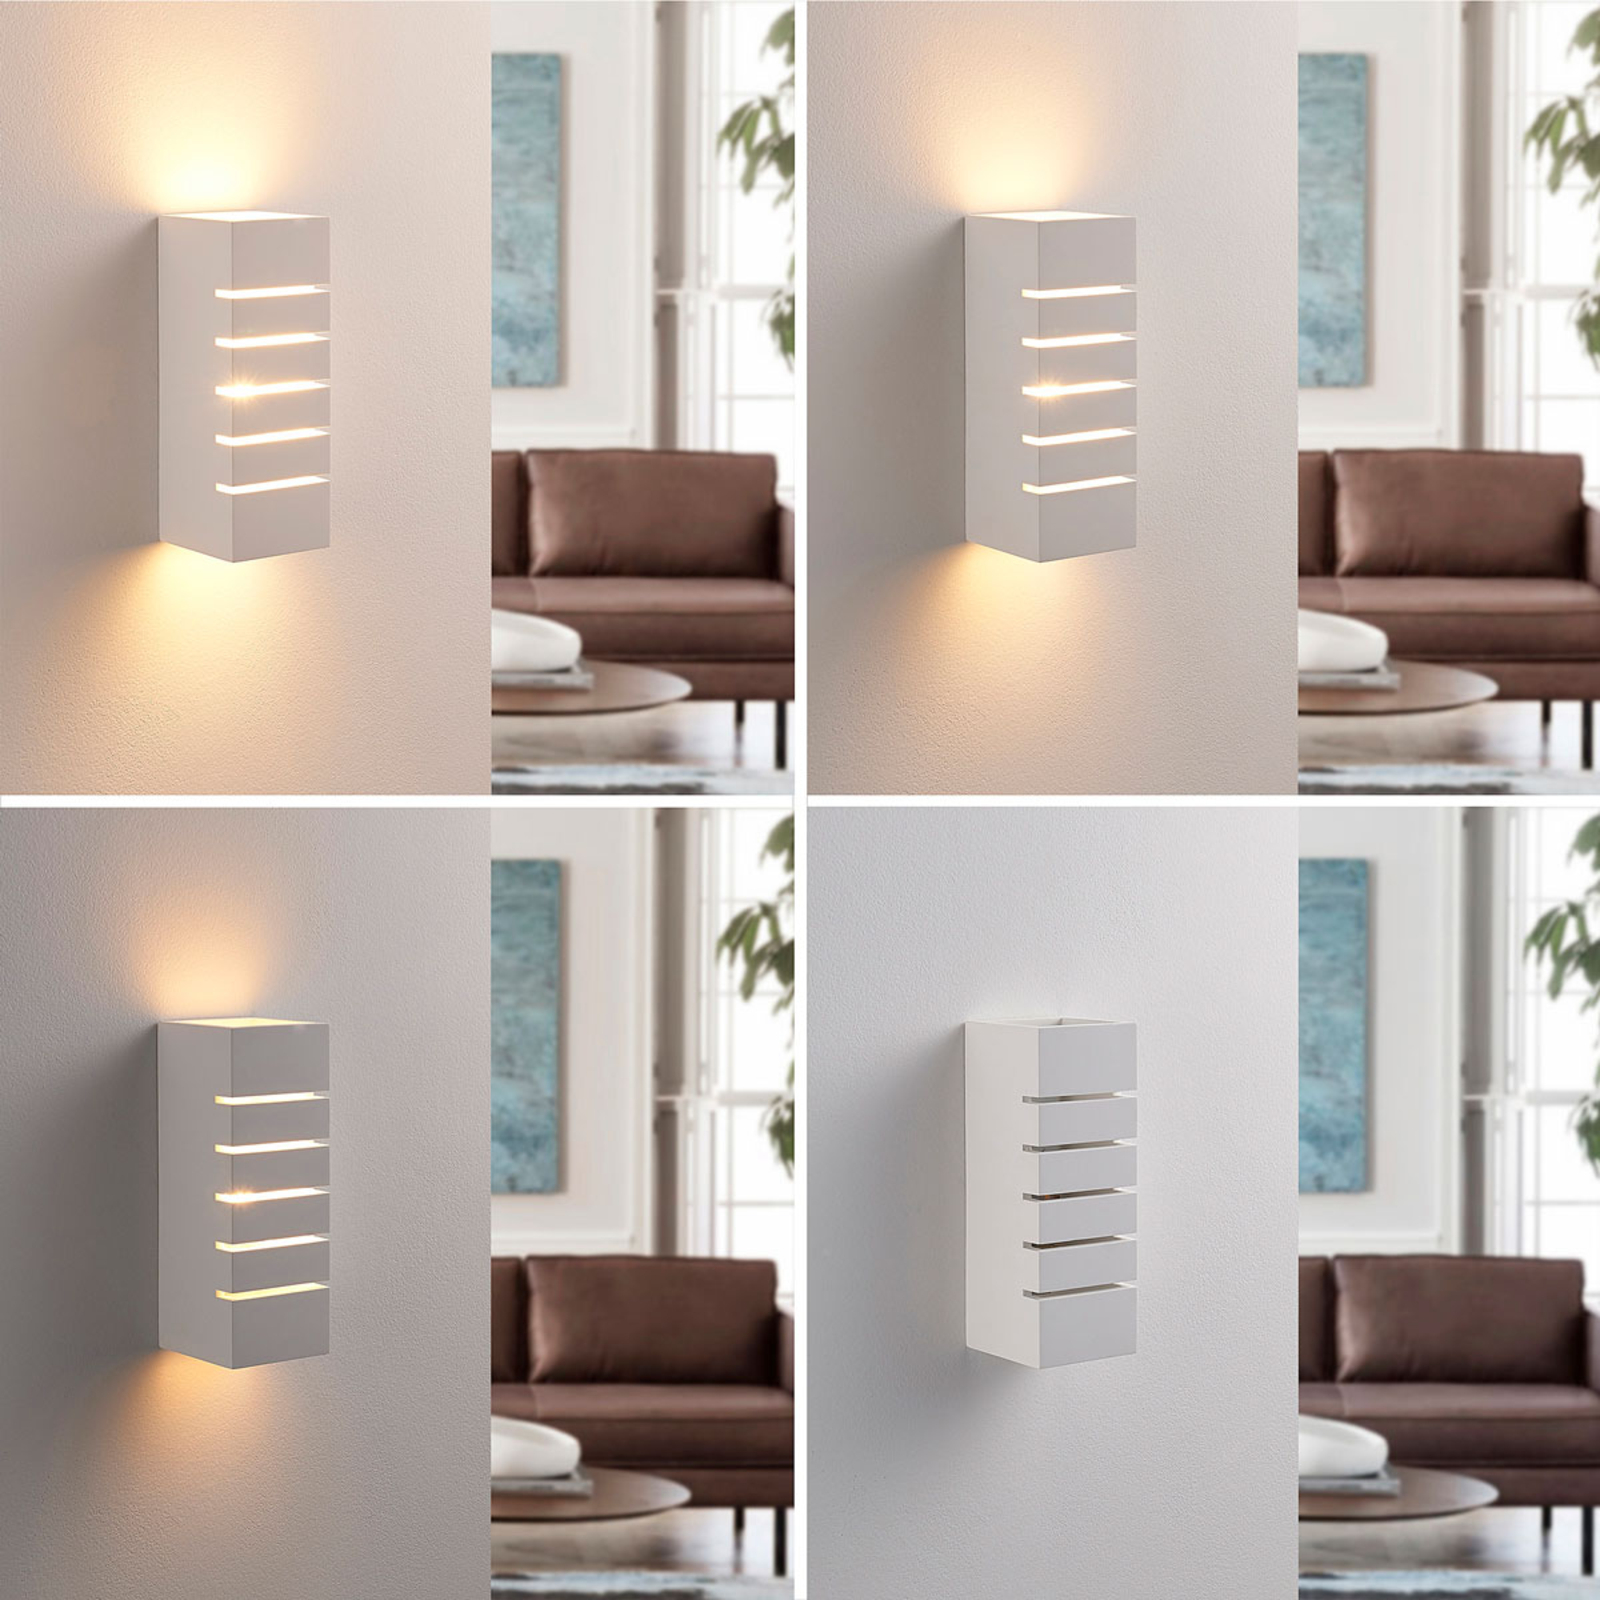 Lindby wall light Laslo, white, plaster, 25 cm high, paintable